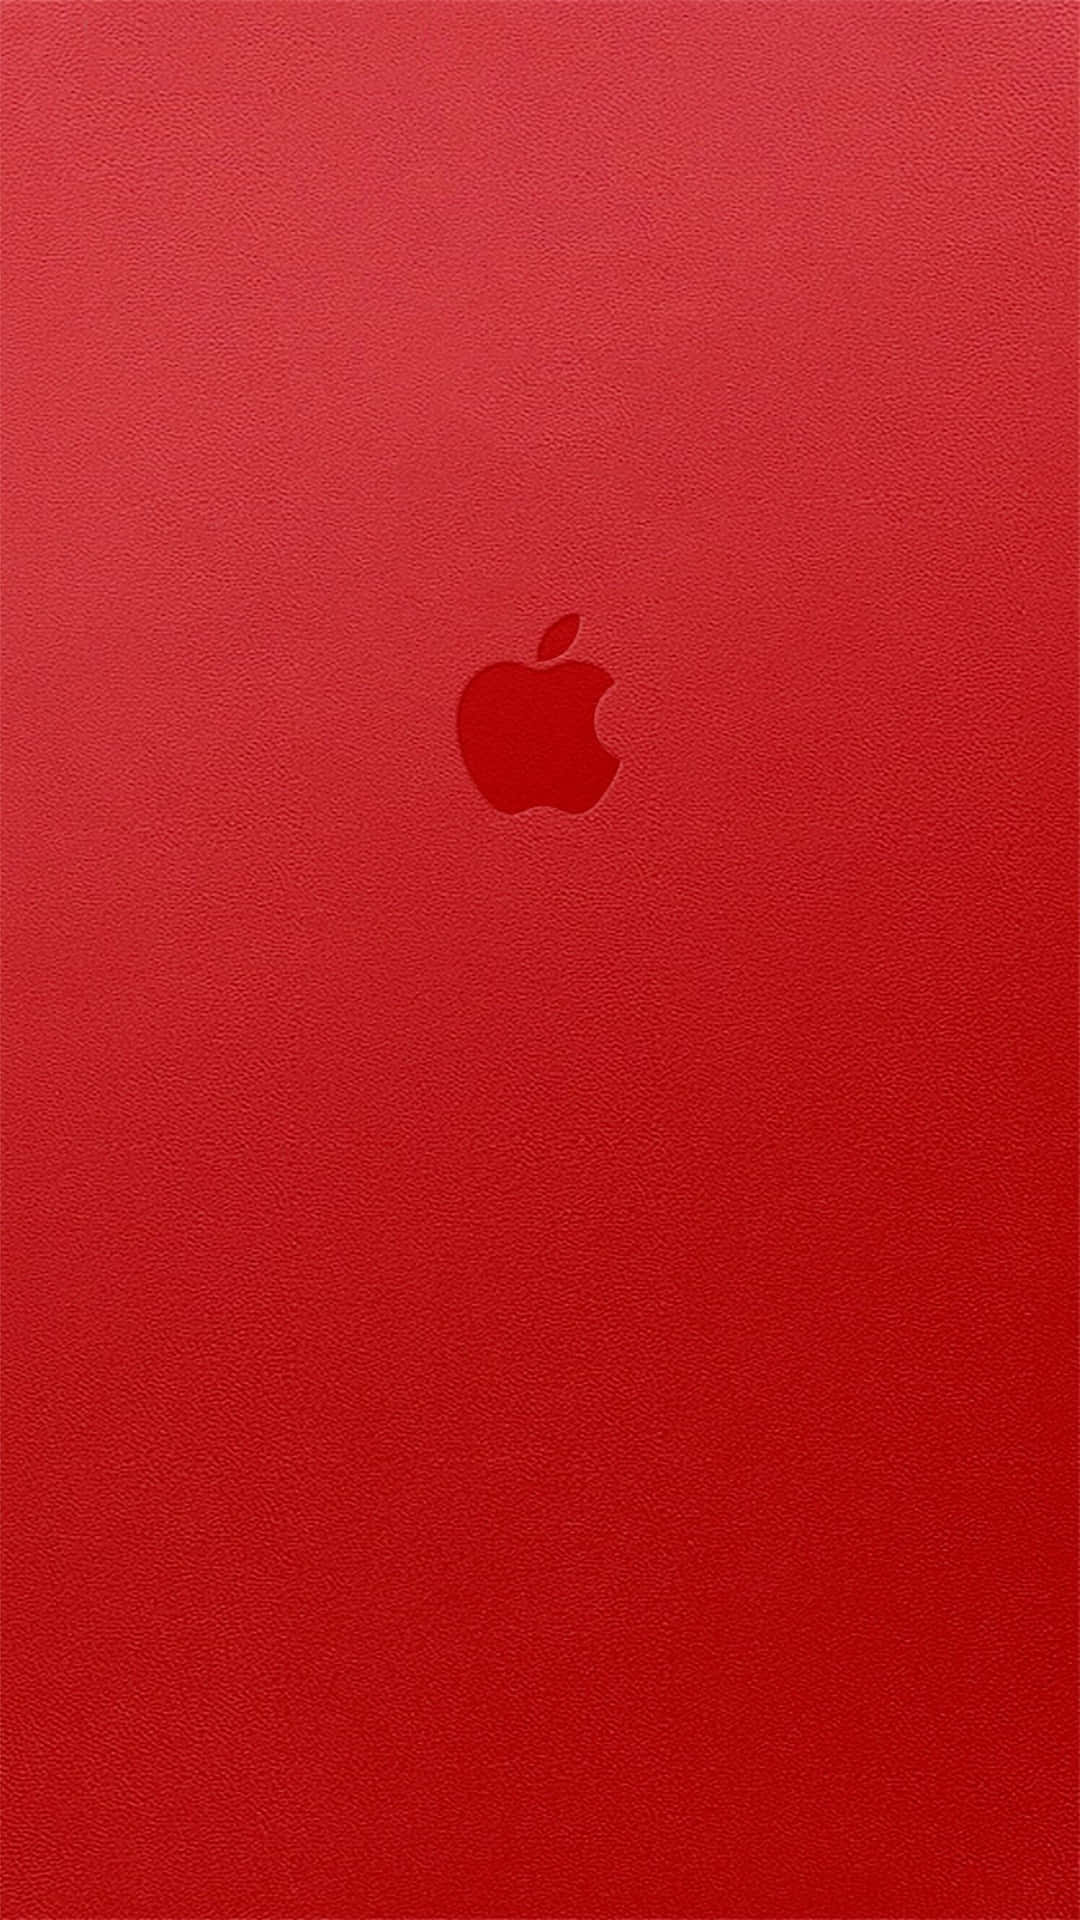 Captivating Red iPhone X Wallpaper